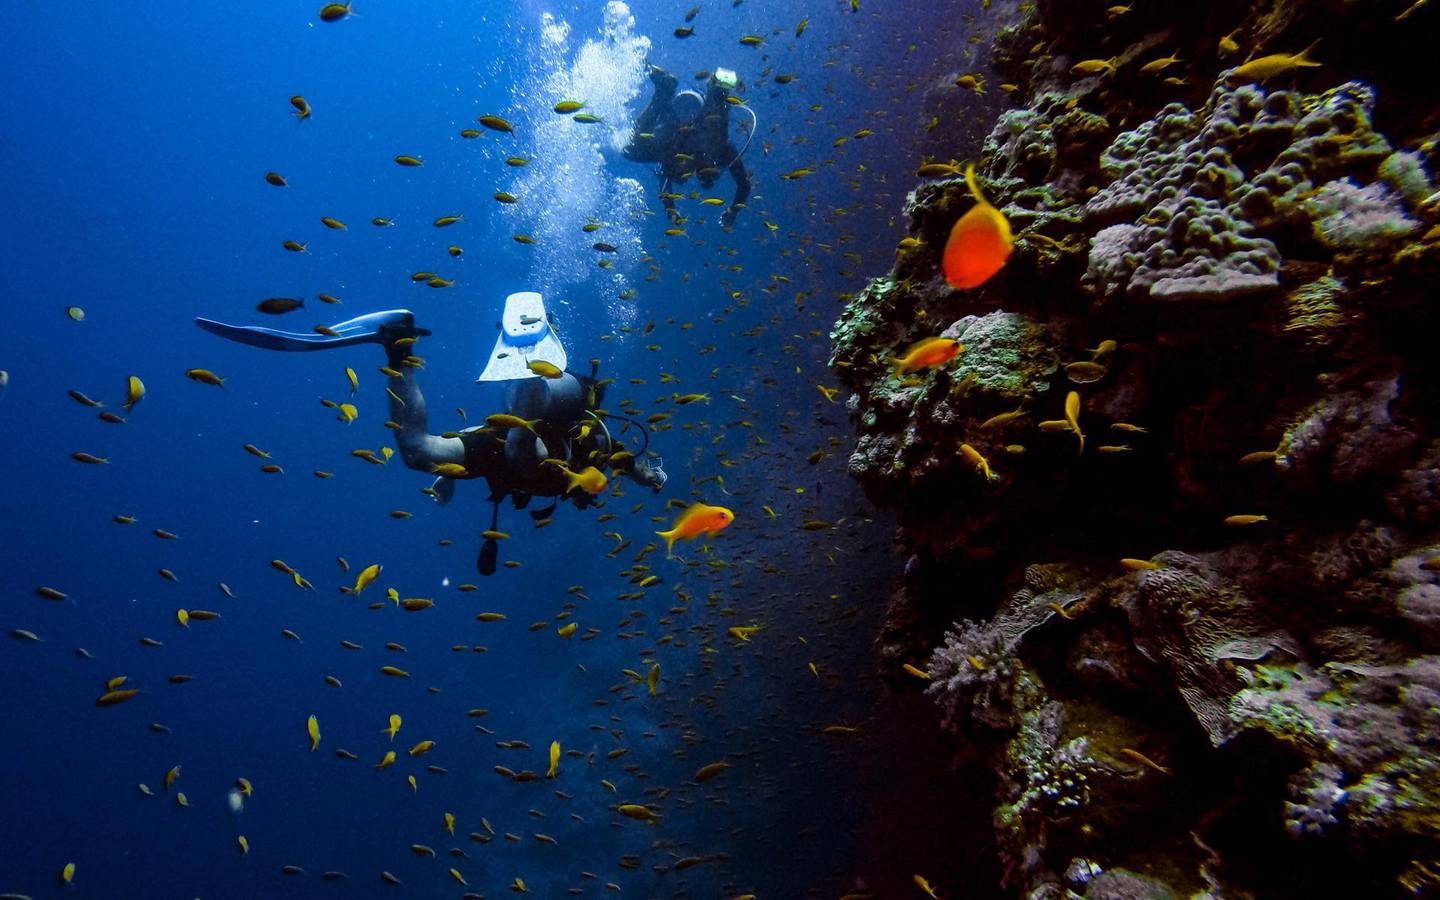 Egypt's Red Sea has some fantastic diving sites. Unsplash